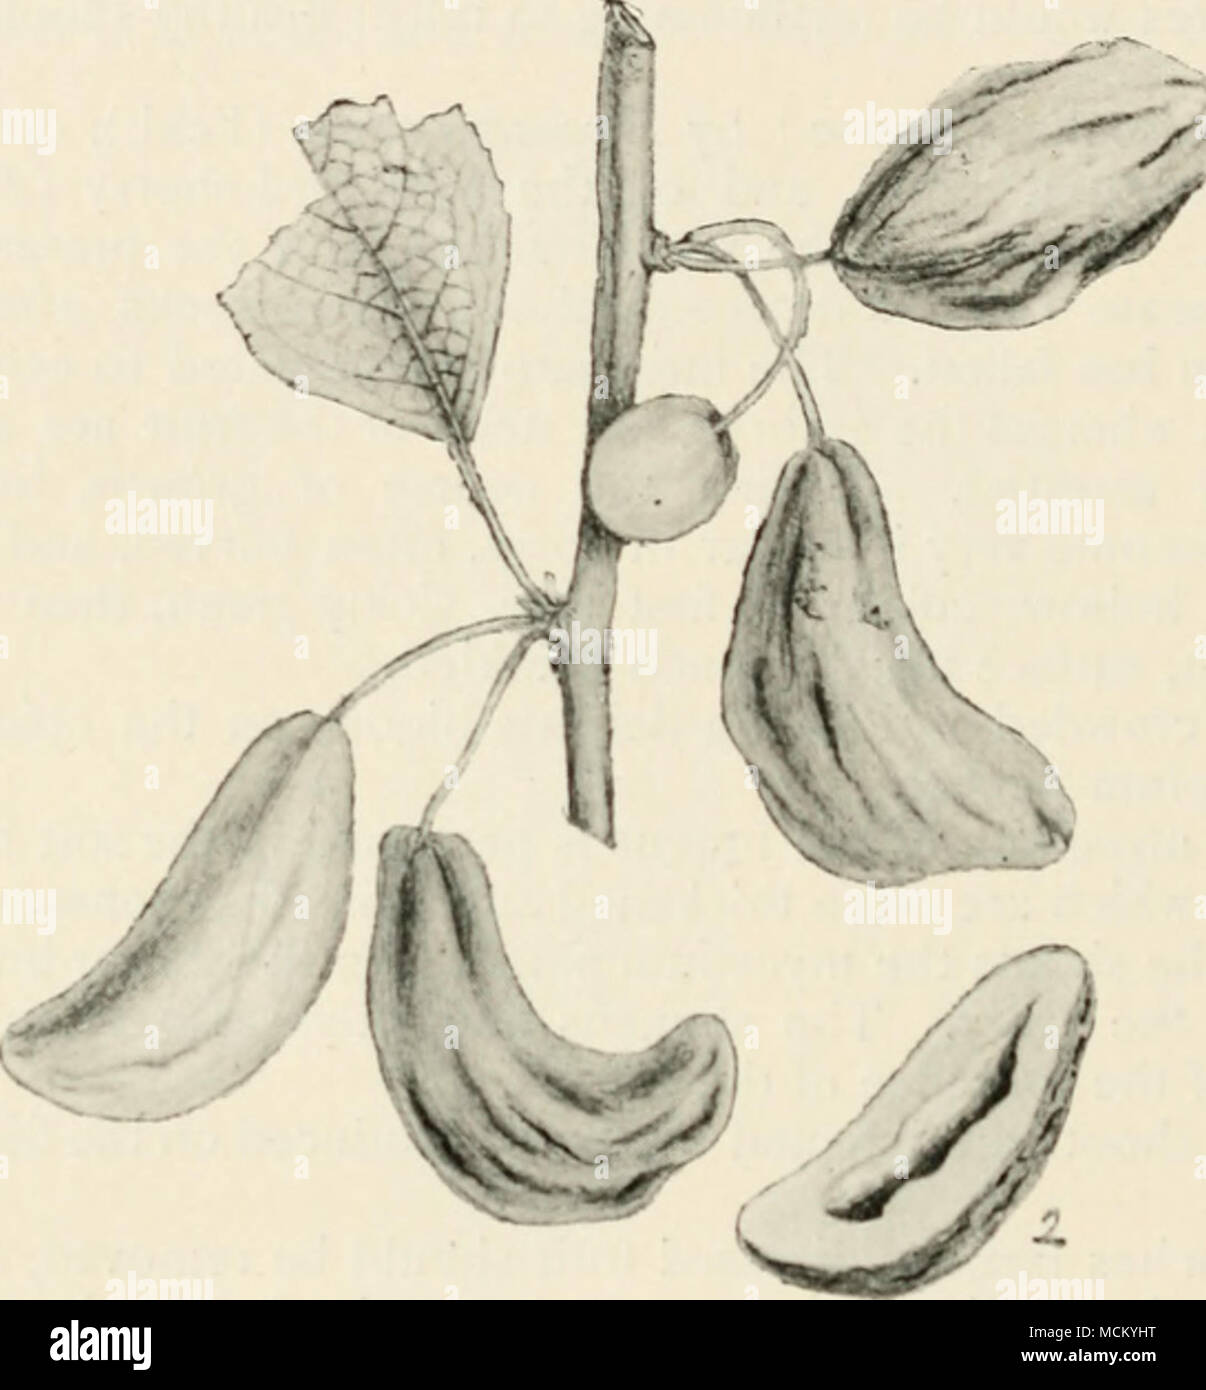 . Fig. 33.—Exoascuspruni. i, portion of a branch bearing diseased plums ; 2. a diseased i^luin cut in two. Reduced. and closely resemble crows' nests in appearance, although sometimes much larger in size. The formation of these brooms takes place as follows, according to Smith :— ' I find that a broom results from a prolific development of small twigs on one or a few knotty, swollen parts of a branch. Each central knot we may regard as the position of the bud which was first infected, and from which the broom system took its origin. As one result of the attack of the fungus, the greater number Stock Photo